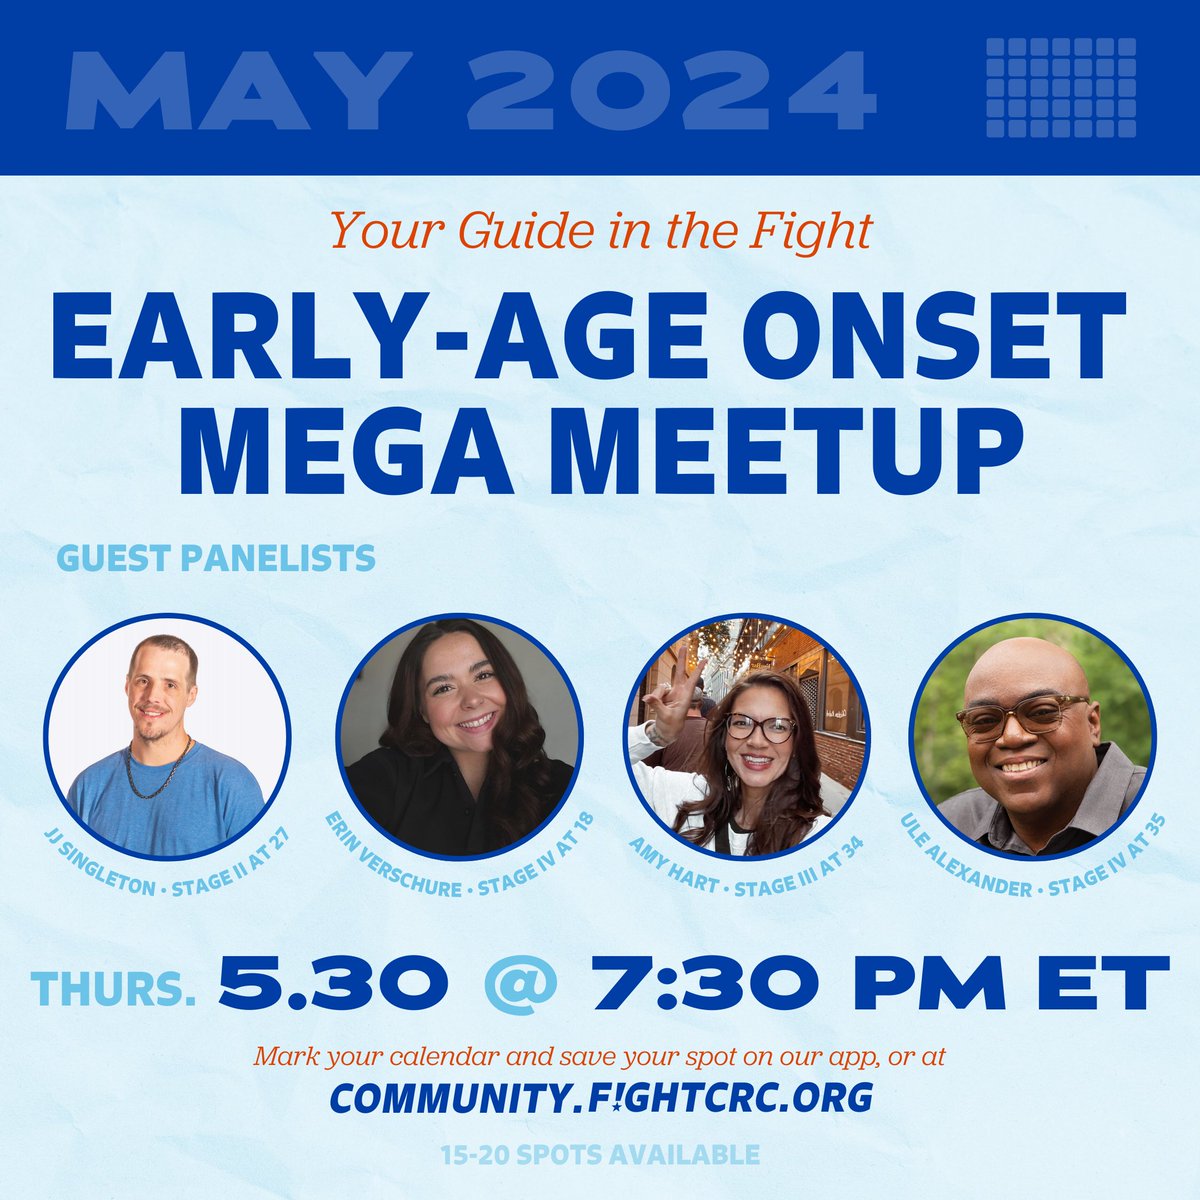 Come join me @FightCRC my best friend @barefootostomy and 2 other incredible early age onset cancer survivors @erinverscheure @ulealexanderjr As we talk about life and everything with cancer as a young adult Link below is to community of champions community.fightcrc.org/landing?from=h…